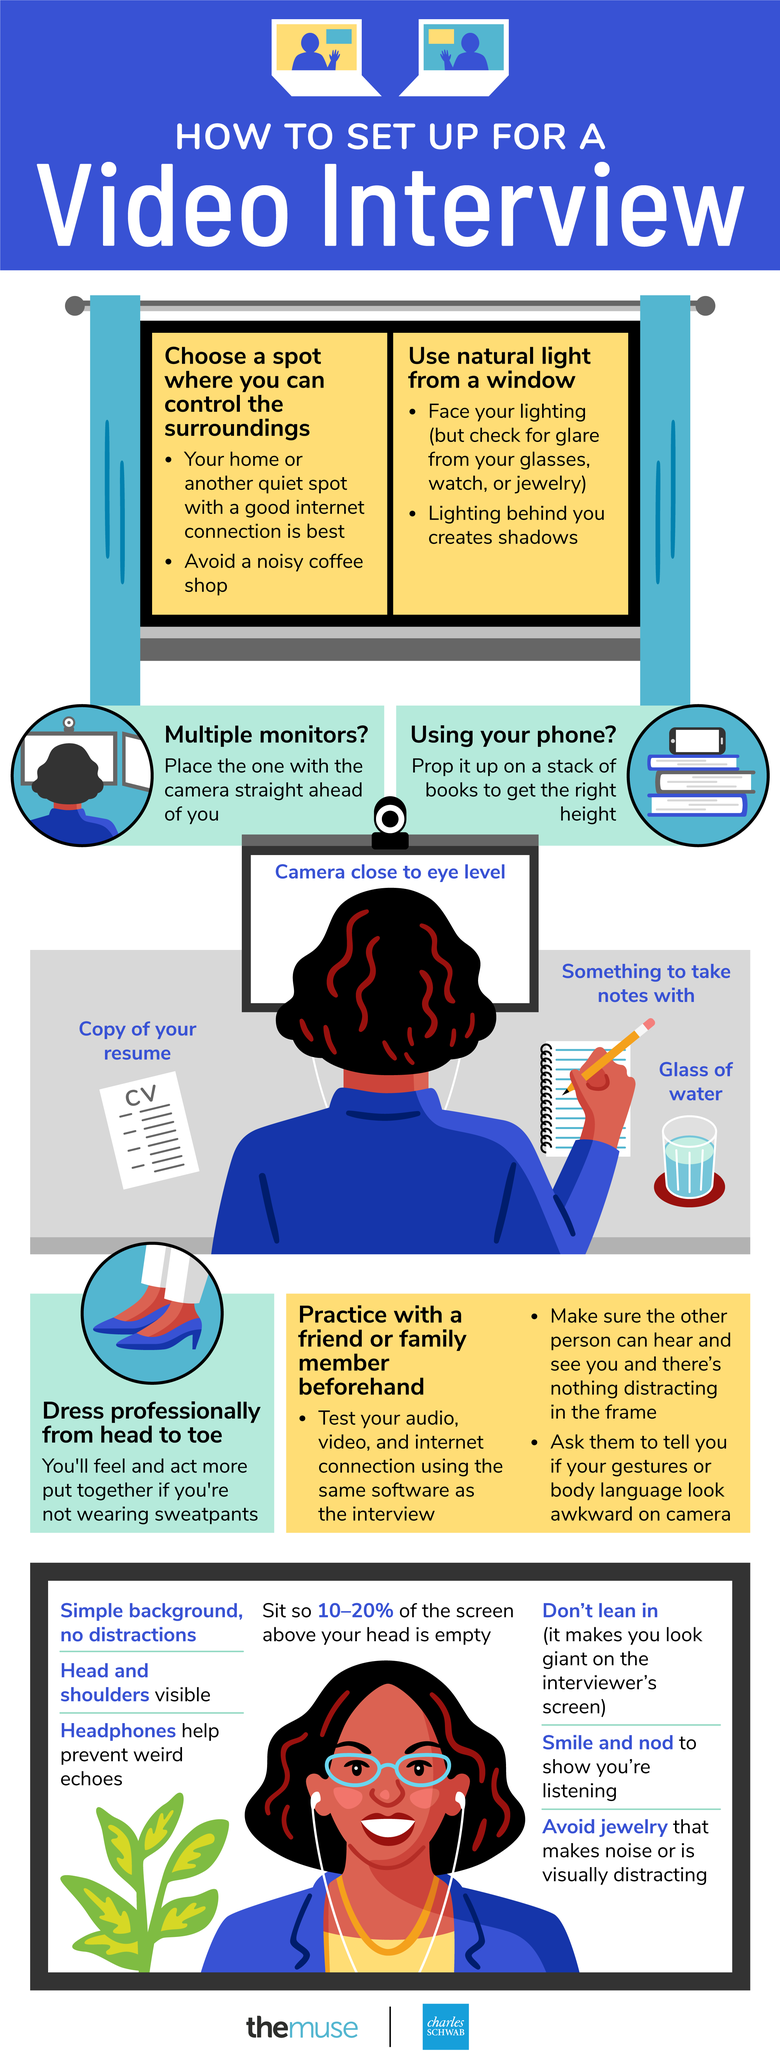 infographic illustrating tips for setting up and preparing for a video interview